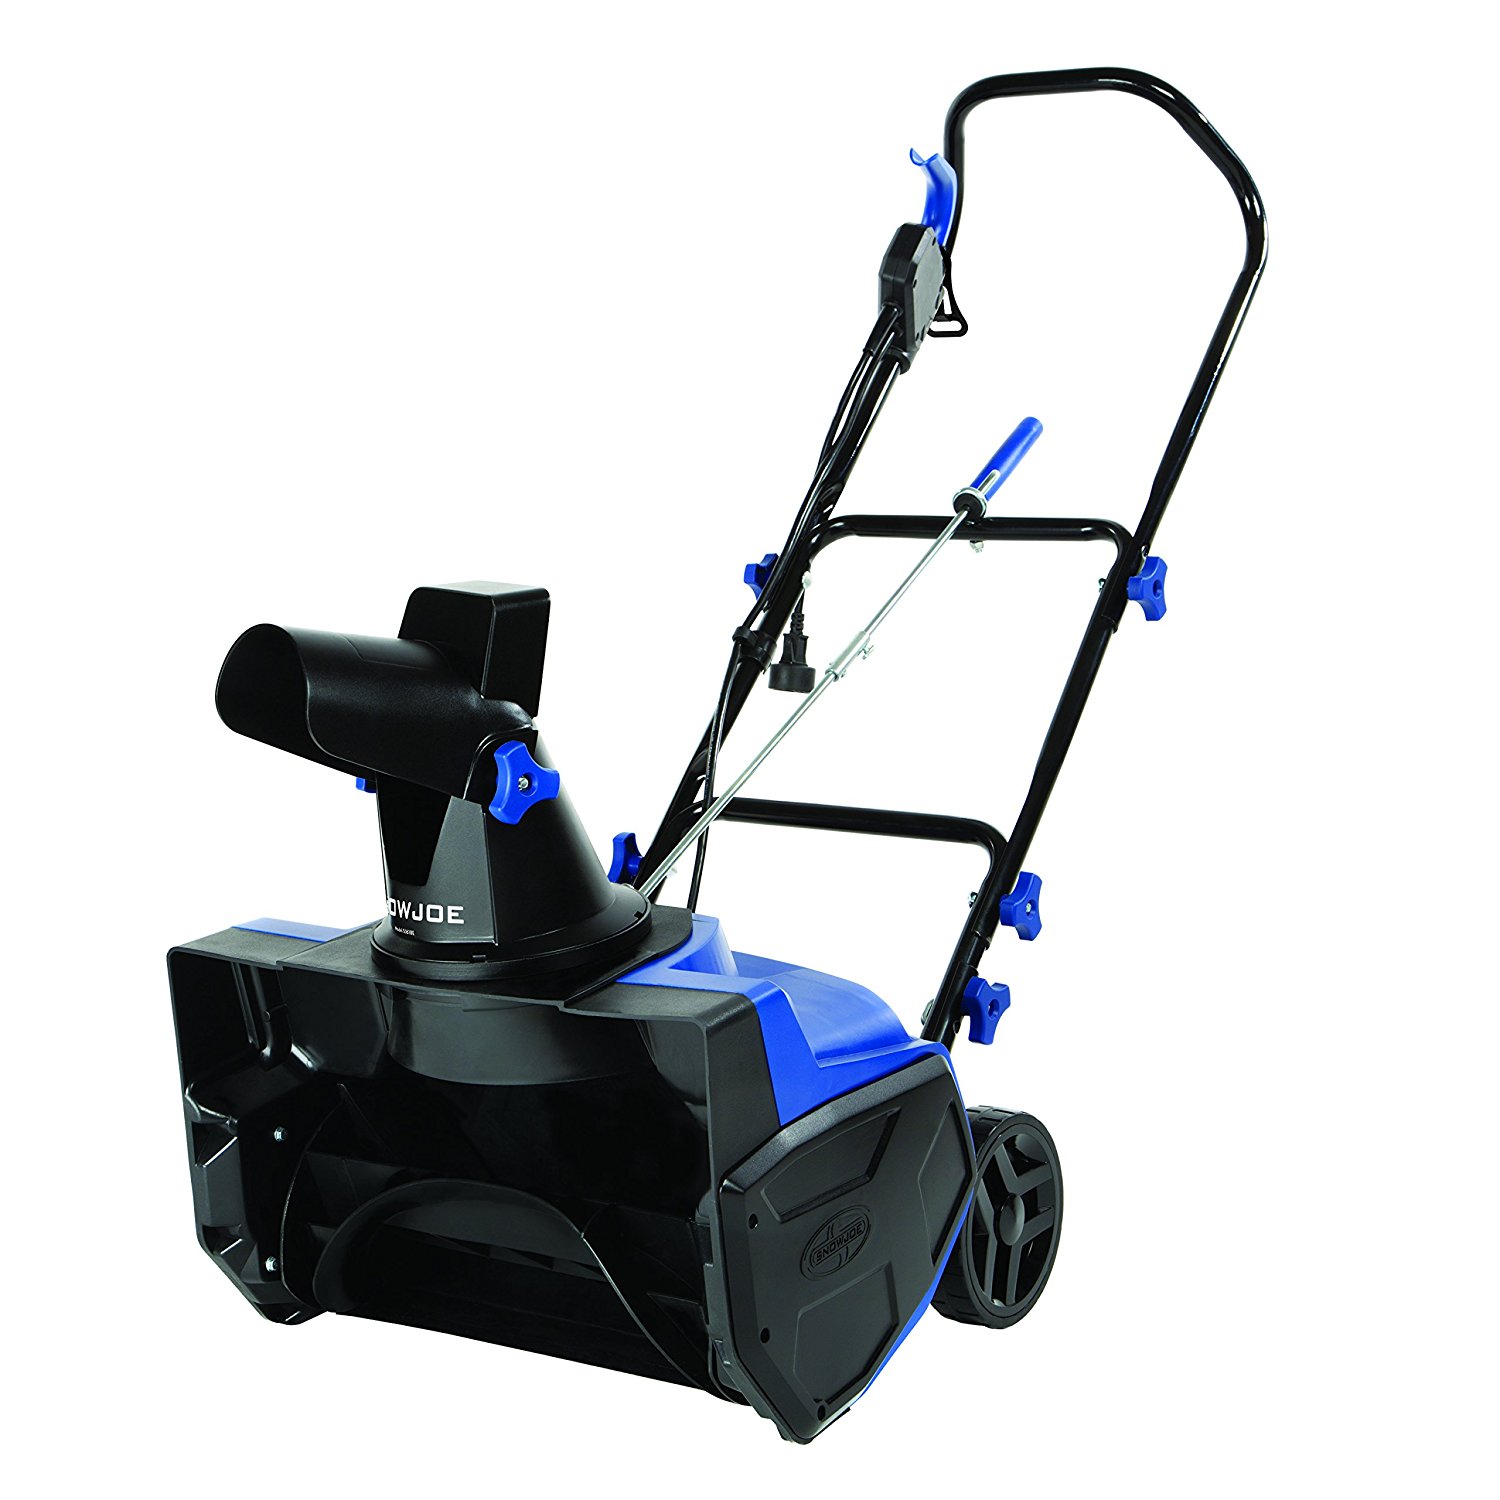 mazon: Used/Like New Electric Snow Thrower Only $47.42! (Reg $118.88)